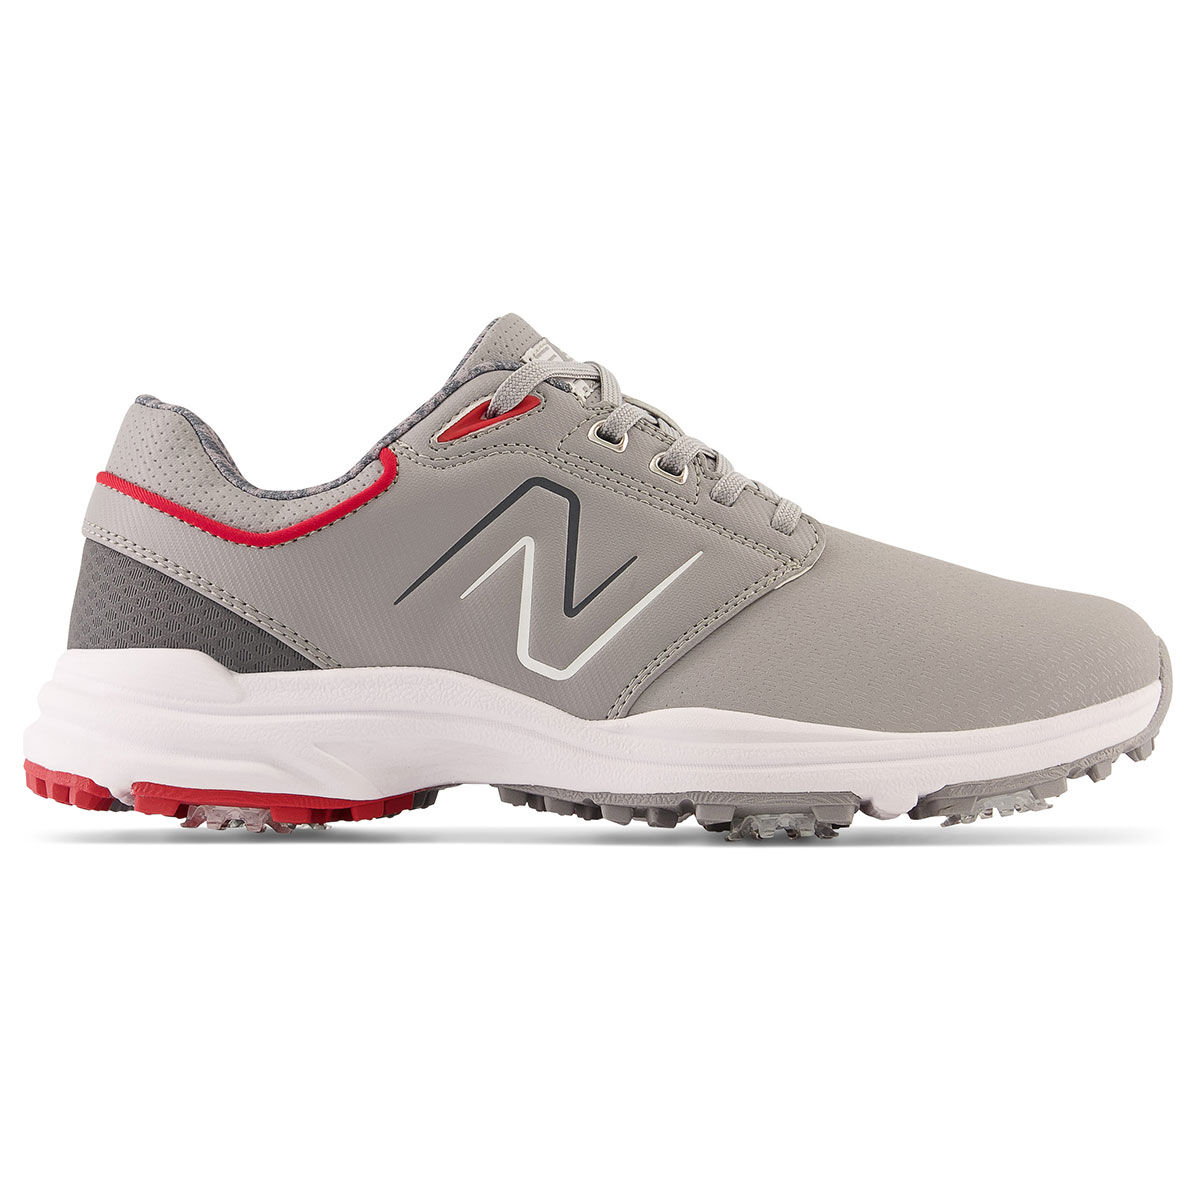 New Balance Men’s Grey Waterproof Brighton Spiked Golf Shoes, Size: 8.5 | American Golf